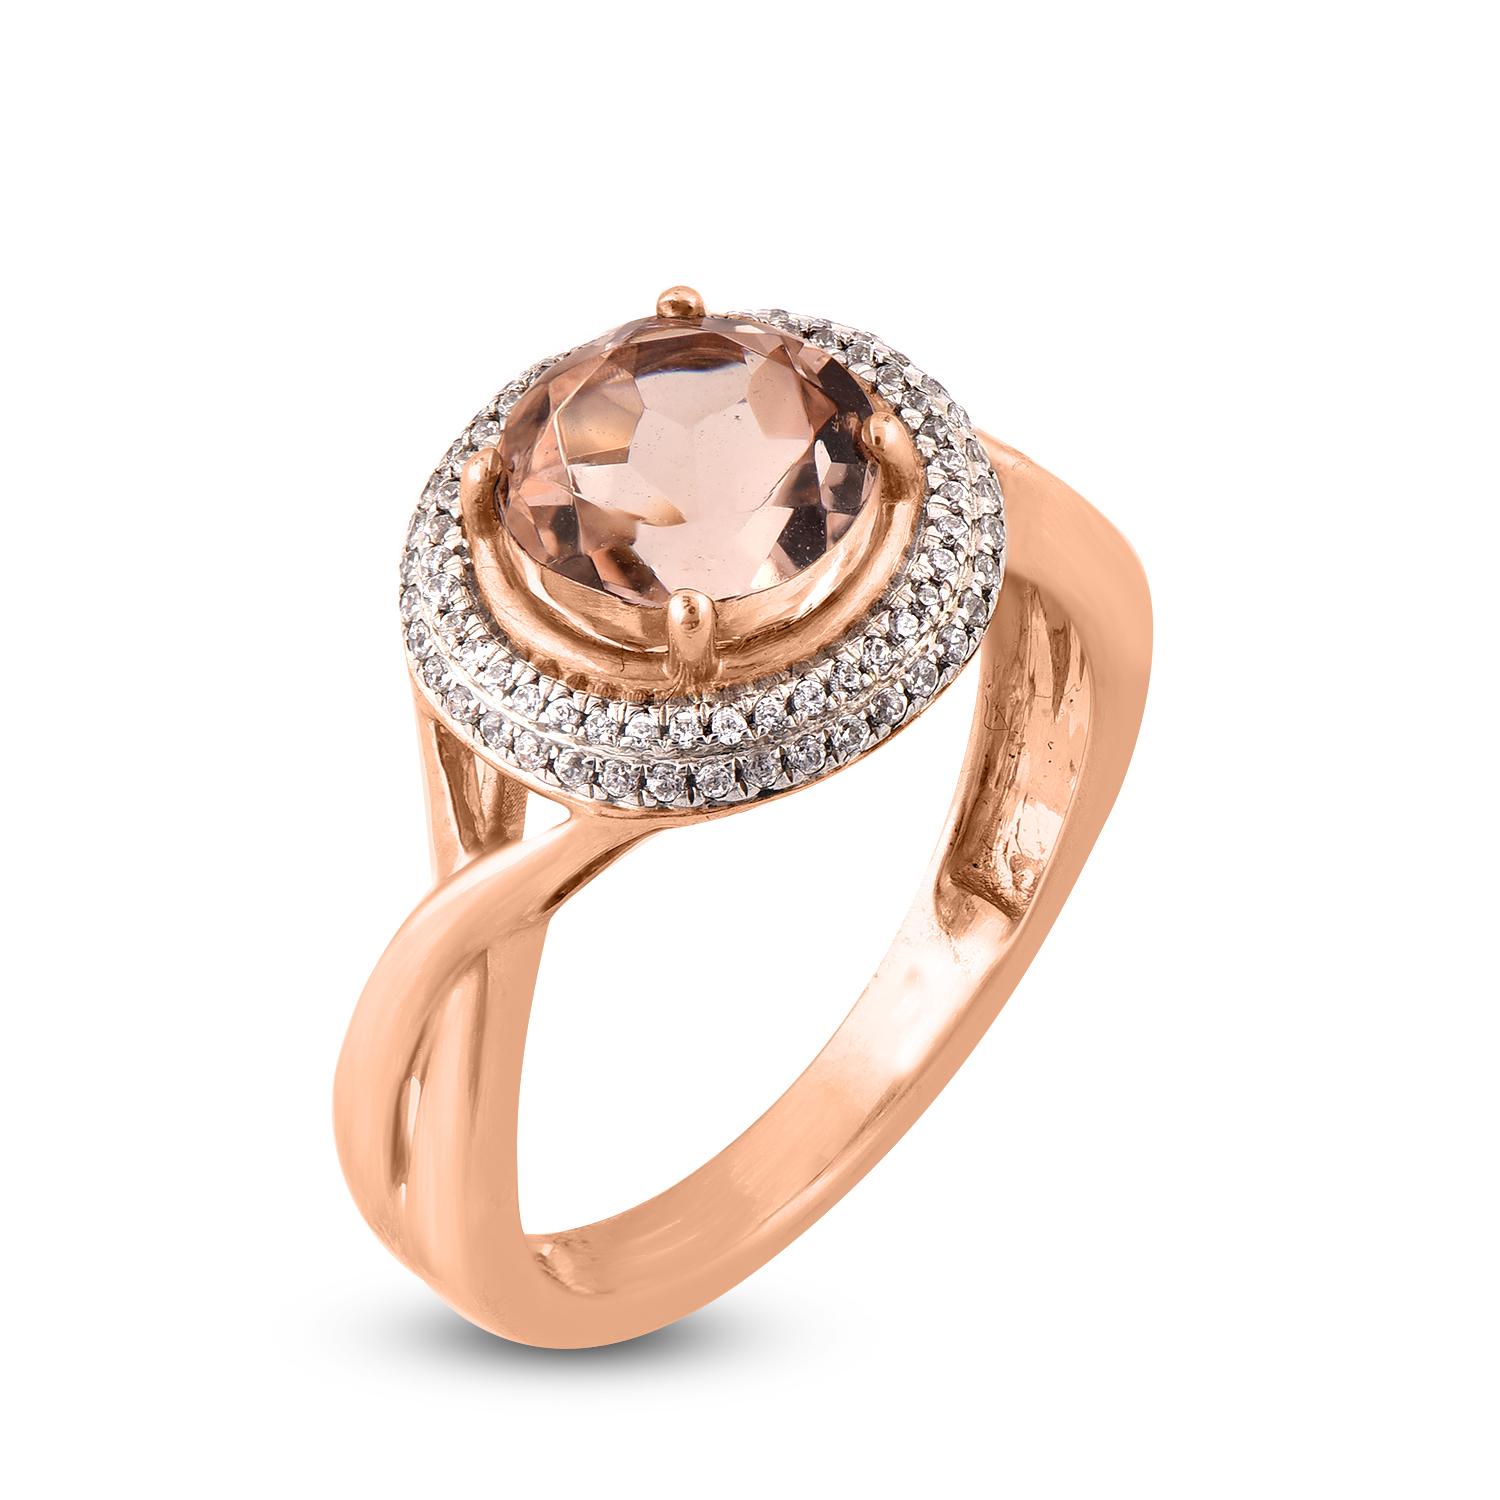 Elegantly designed by our skillful artisans in 14 Karat Rose gold and studded with 76 diamonds and 1 round cut morganite set in prong setting and shines with H-I Color, I2 Clarity. 
This twisted shank designer diamond engagement ring is truly